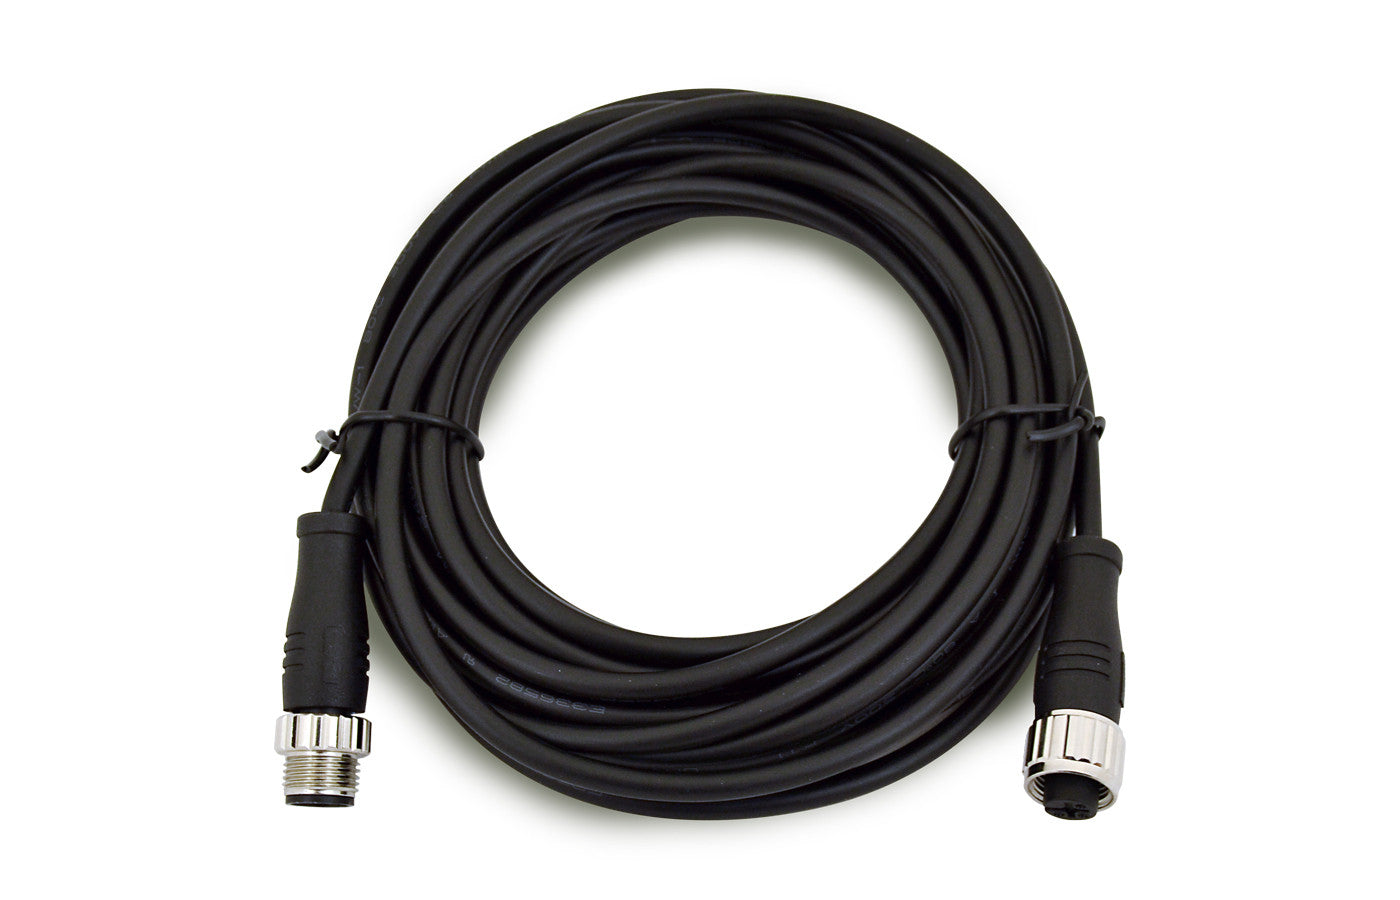 Black 3-pin booster cable cleanly coiled into circle with two twist ties.